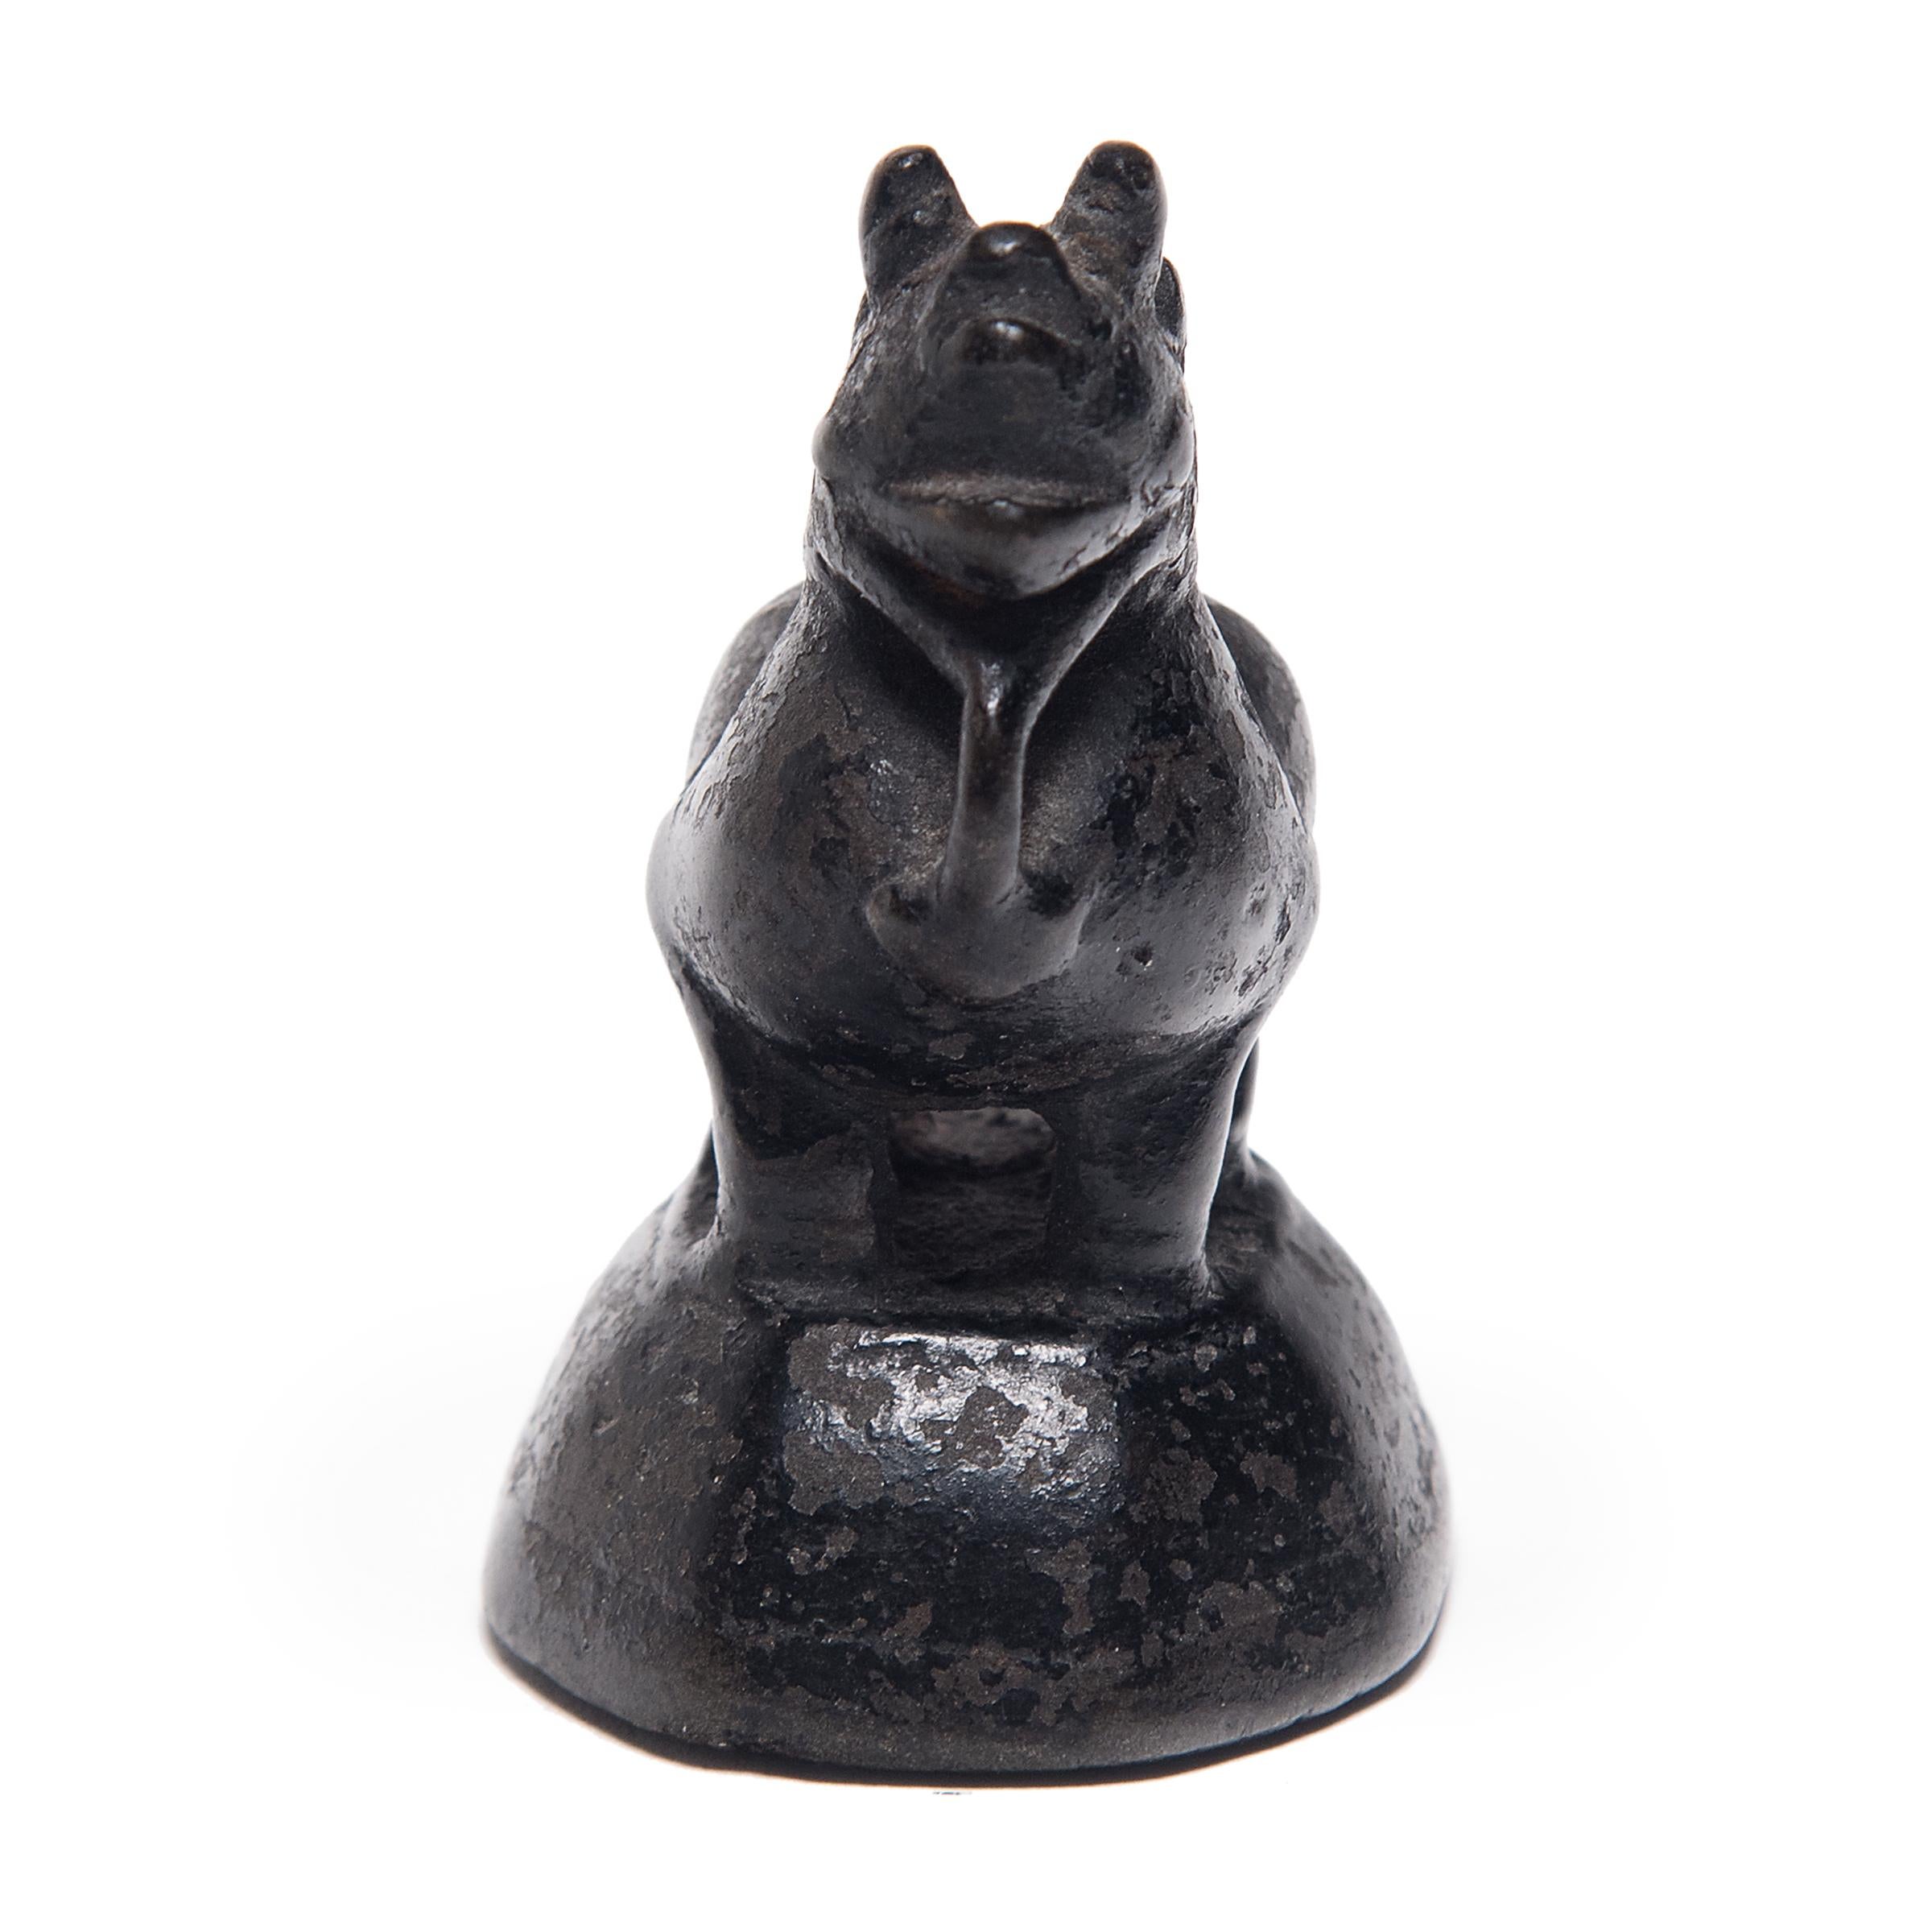 Whether used to parcel out opium, spices, or other valuable goods, this small figurine was originally used as a counterweight for a tabletop balance. Cast in bronze, the petite weight takes the form of a mythical guardian fu dog, or shizi. A symbol